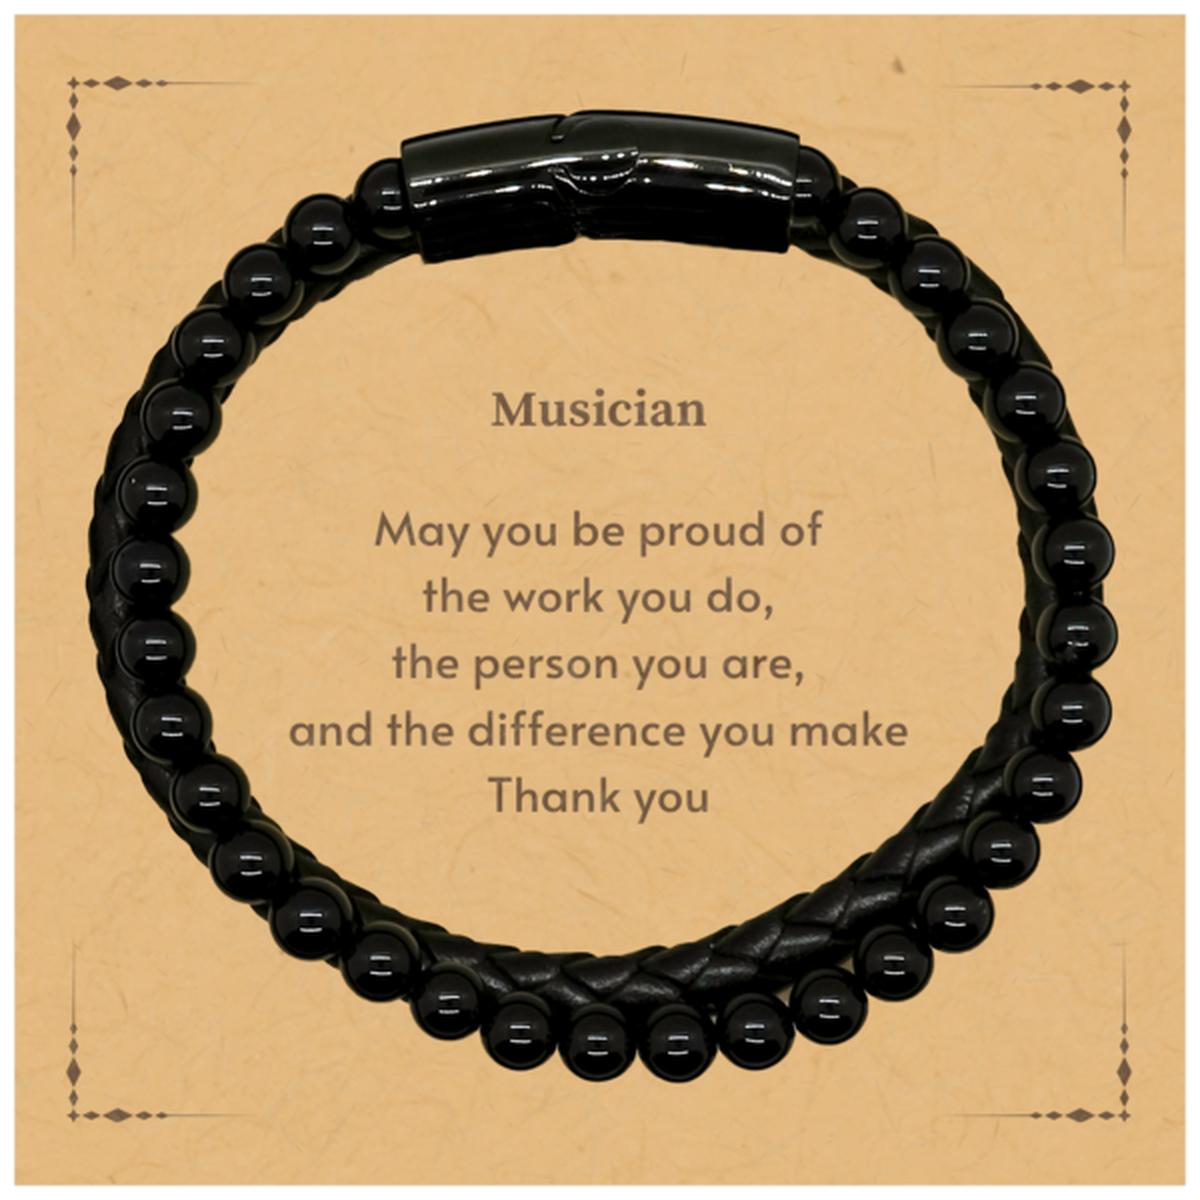 Heartwarming Stone Leather Bracelets Retirement Coworkers Gifts for Musician, Musician May You be proud of the work you do, the person you are Gifts for Boss Men Women Friends